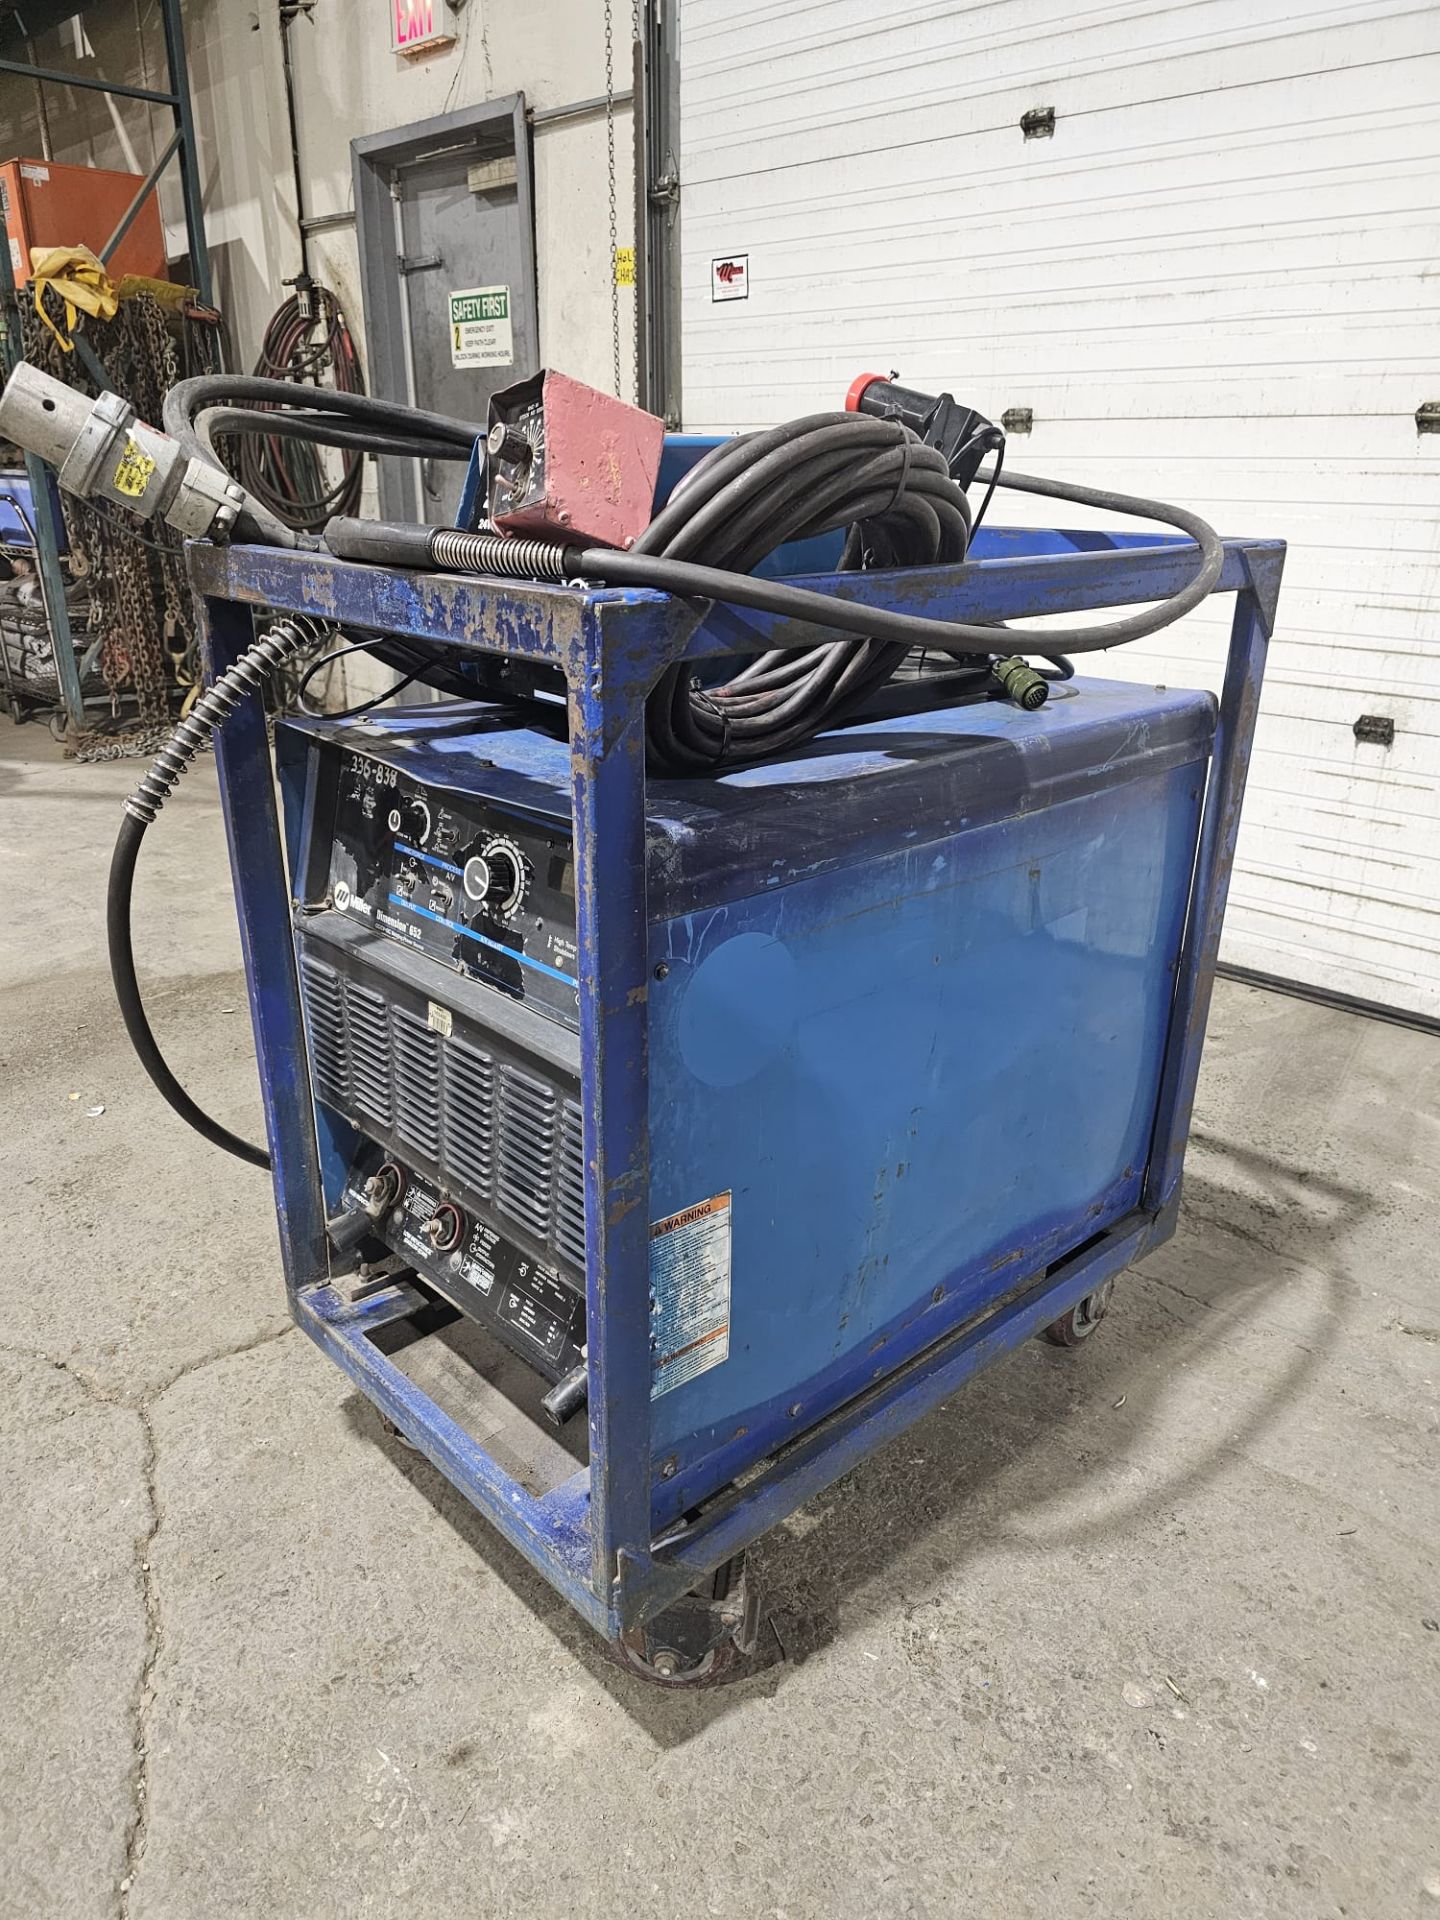 Miller Dimension 652 Mig Welder 650 Amp Mig Tig Stick Multi Process Power Source with 22A Wire - Image 5 of 9